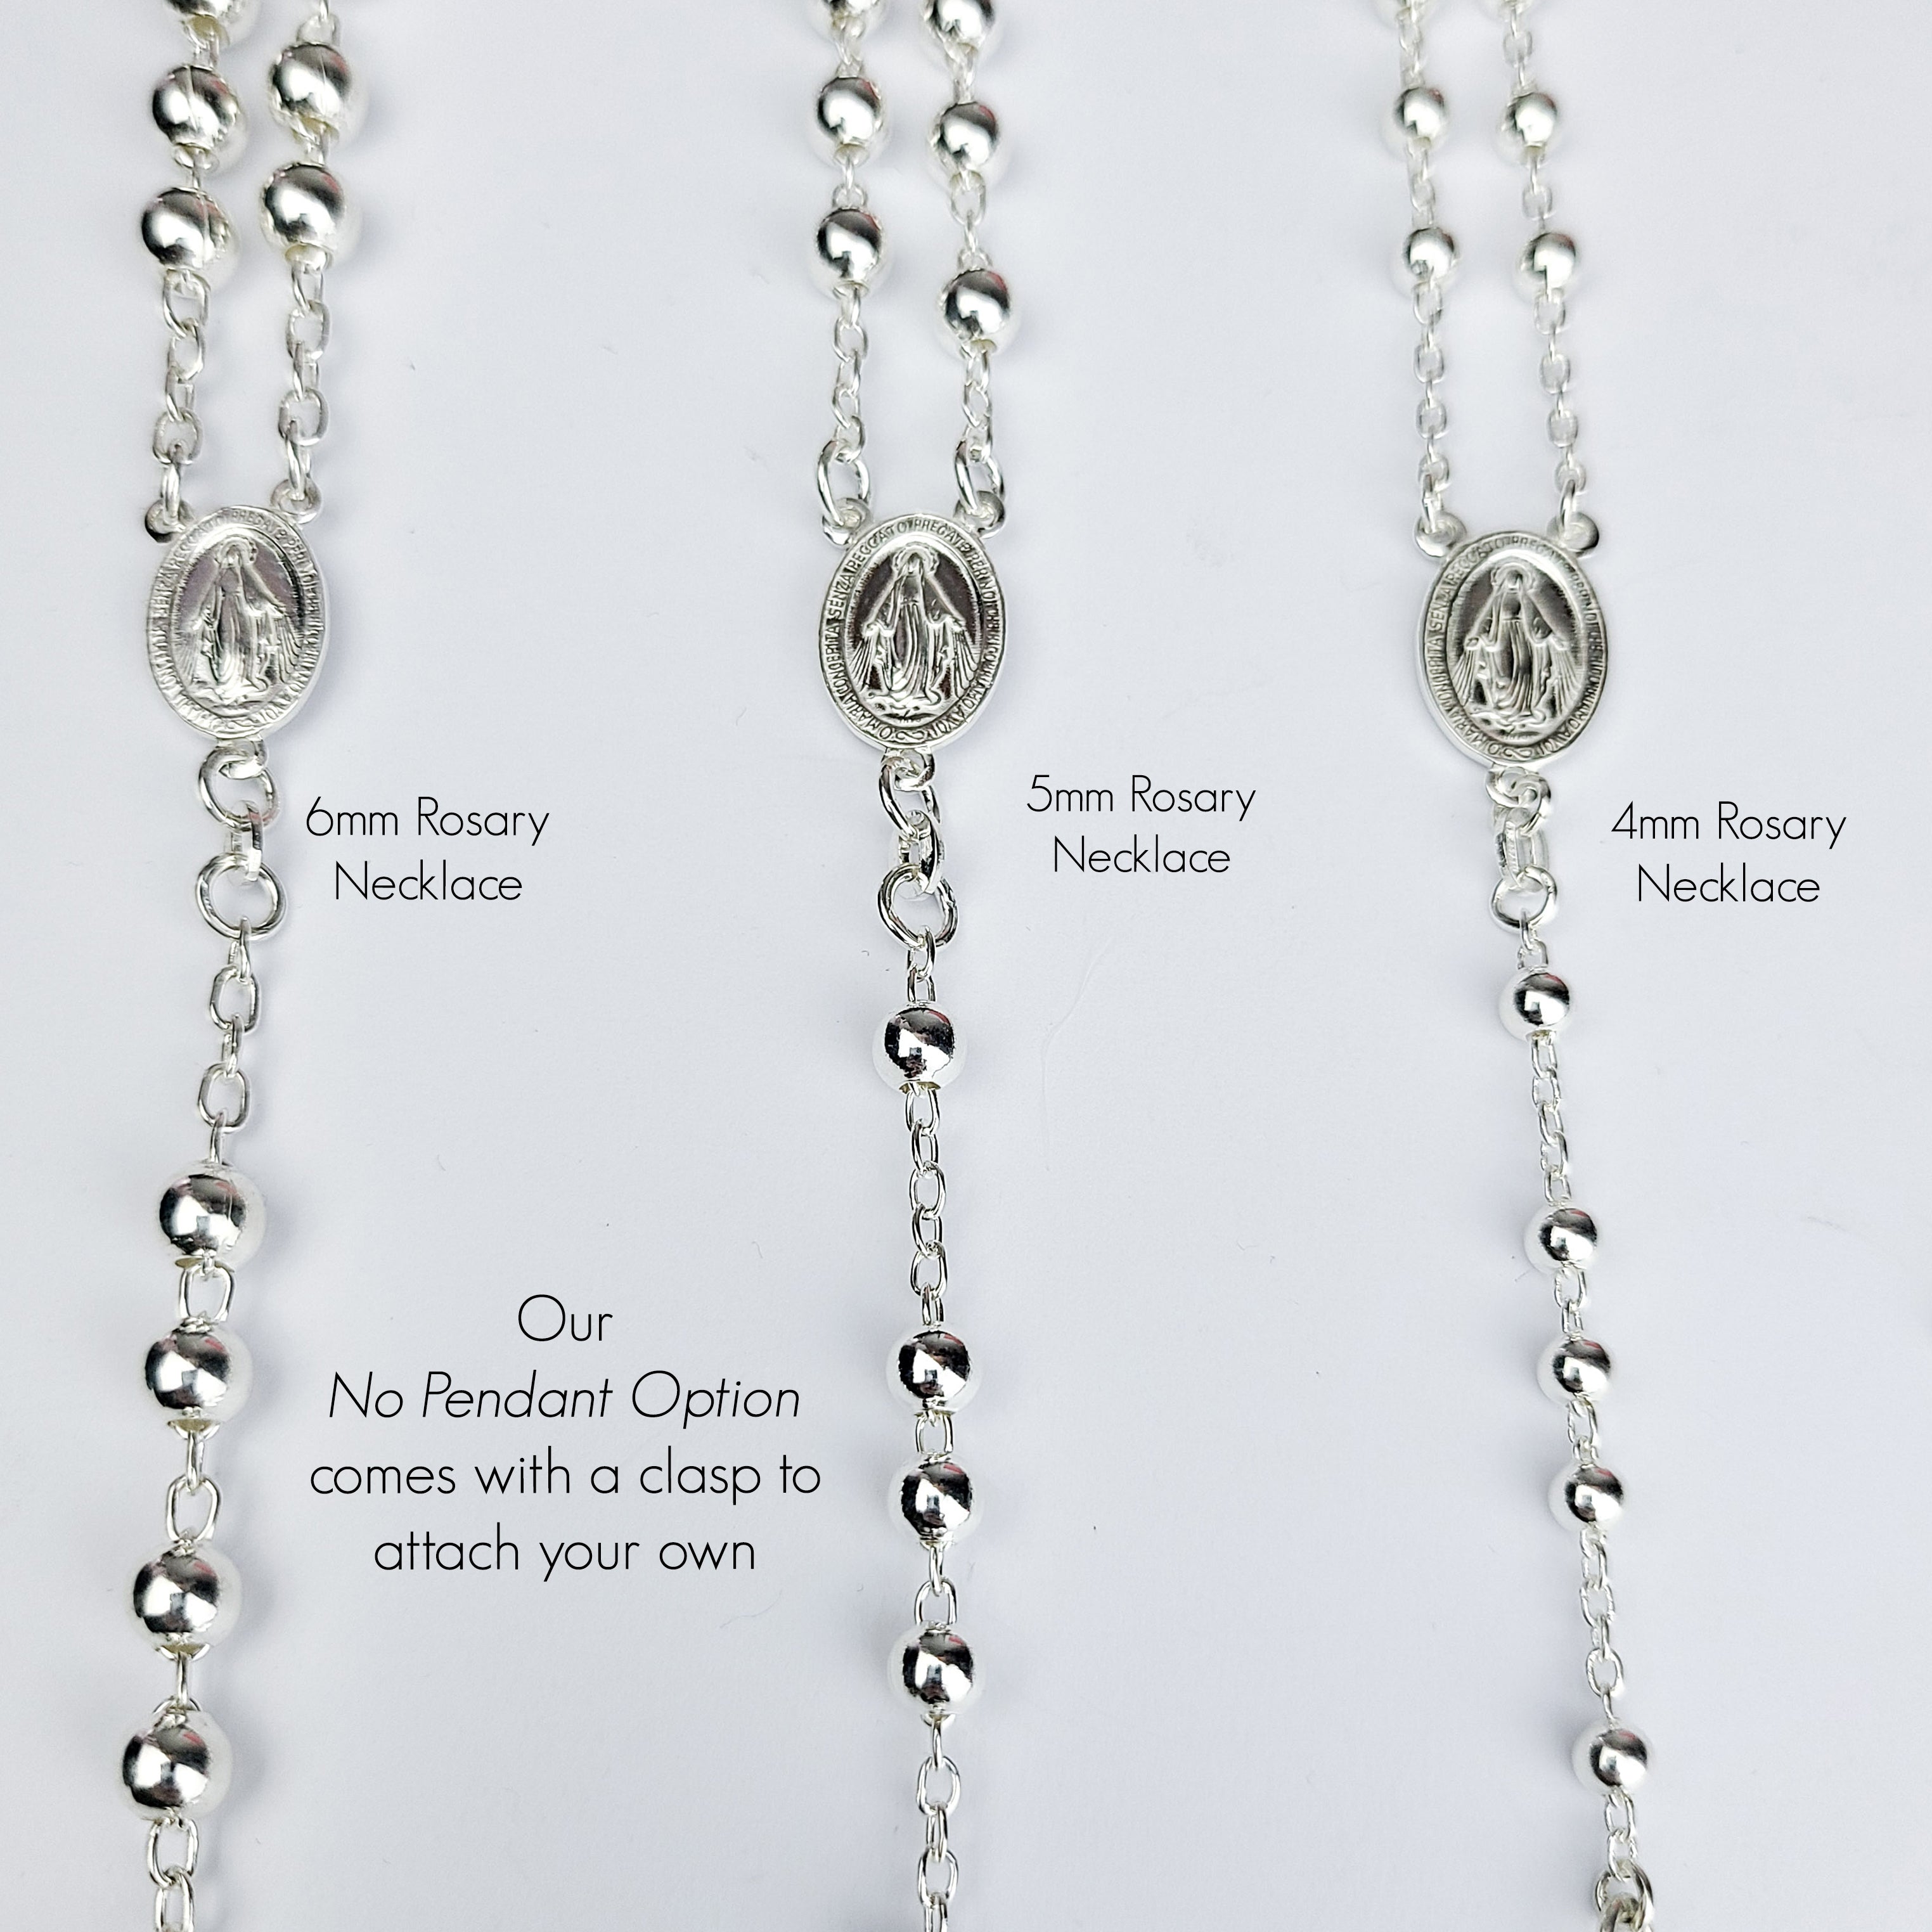 Buy Pearl Rosary Chain in India | Chungath Jewellery Online- Rs. 104,070.00